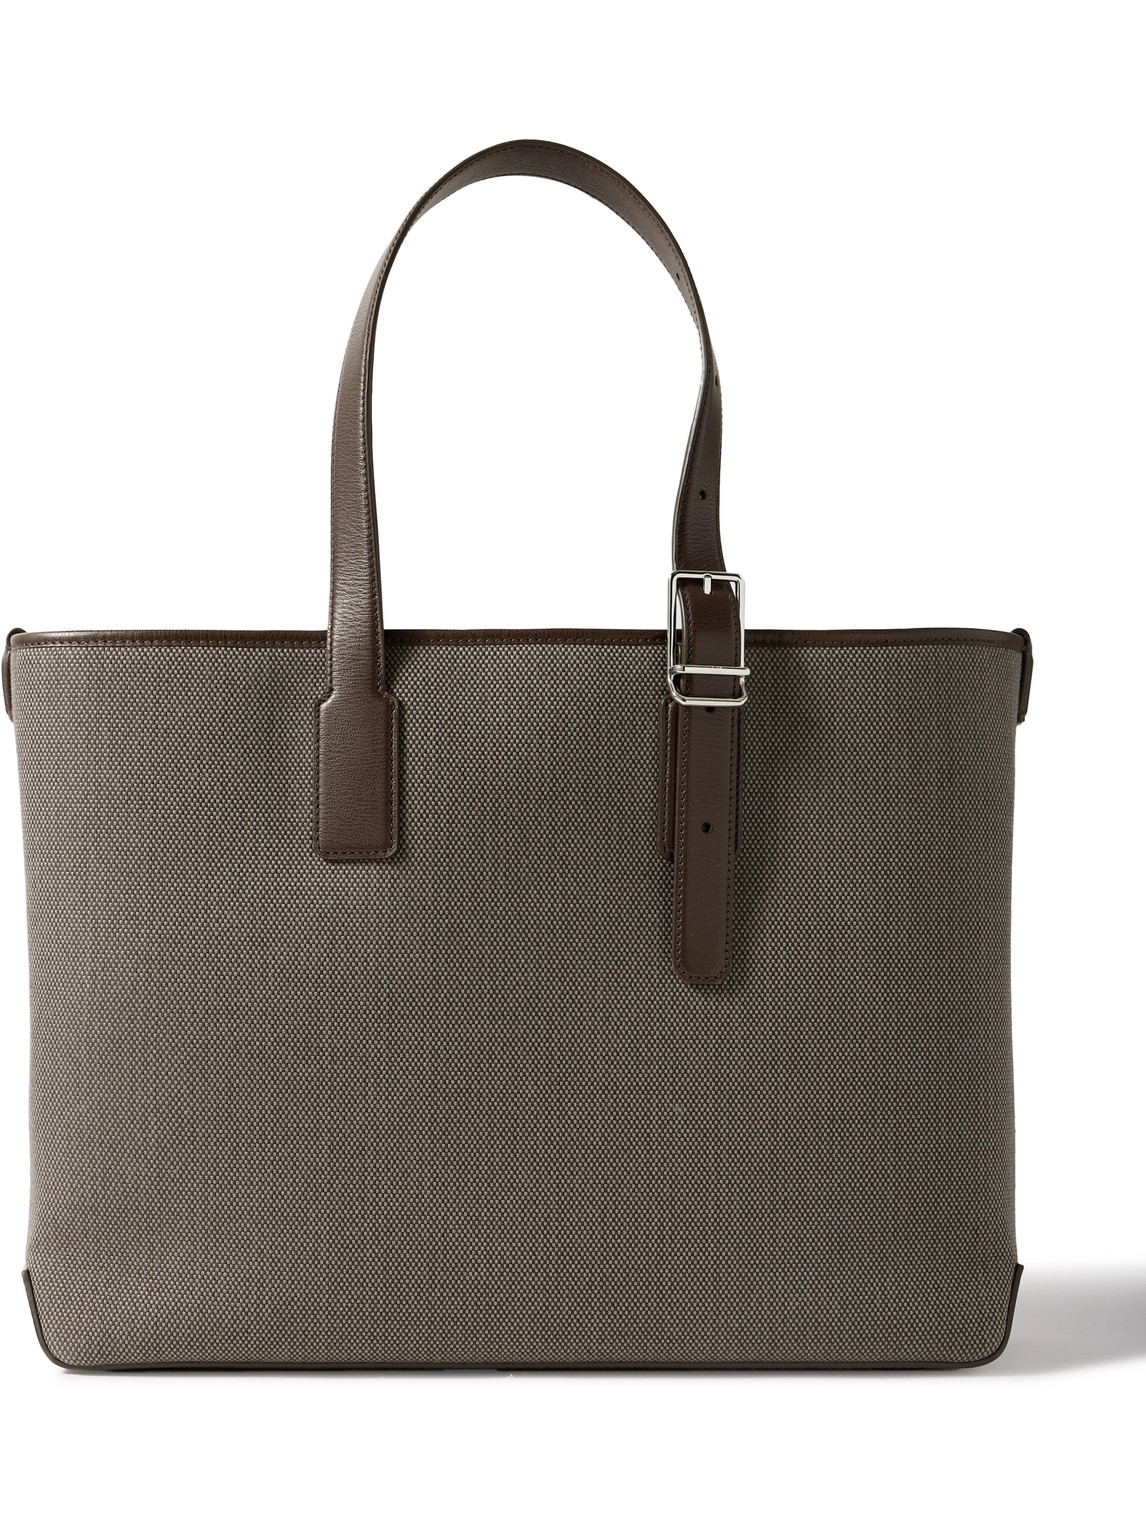 DUNHILL 1893 HARNESS LEATHER-TRIMMED WOVEN TOTE BAG